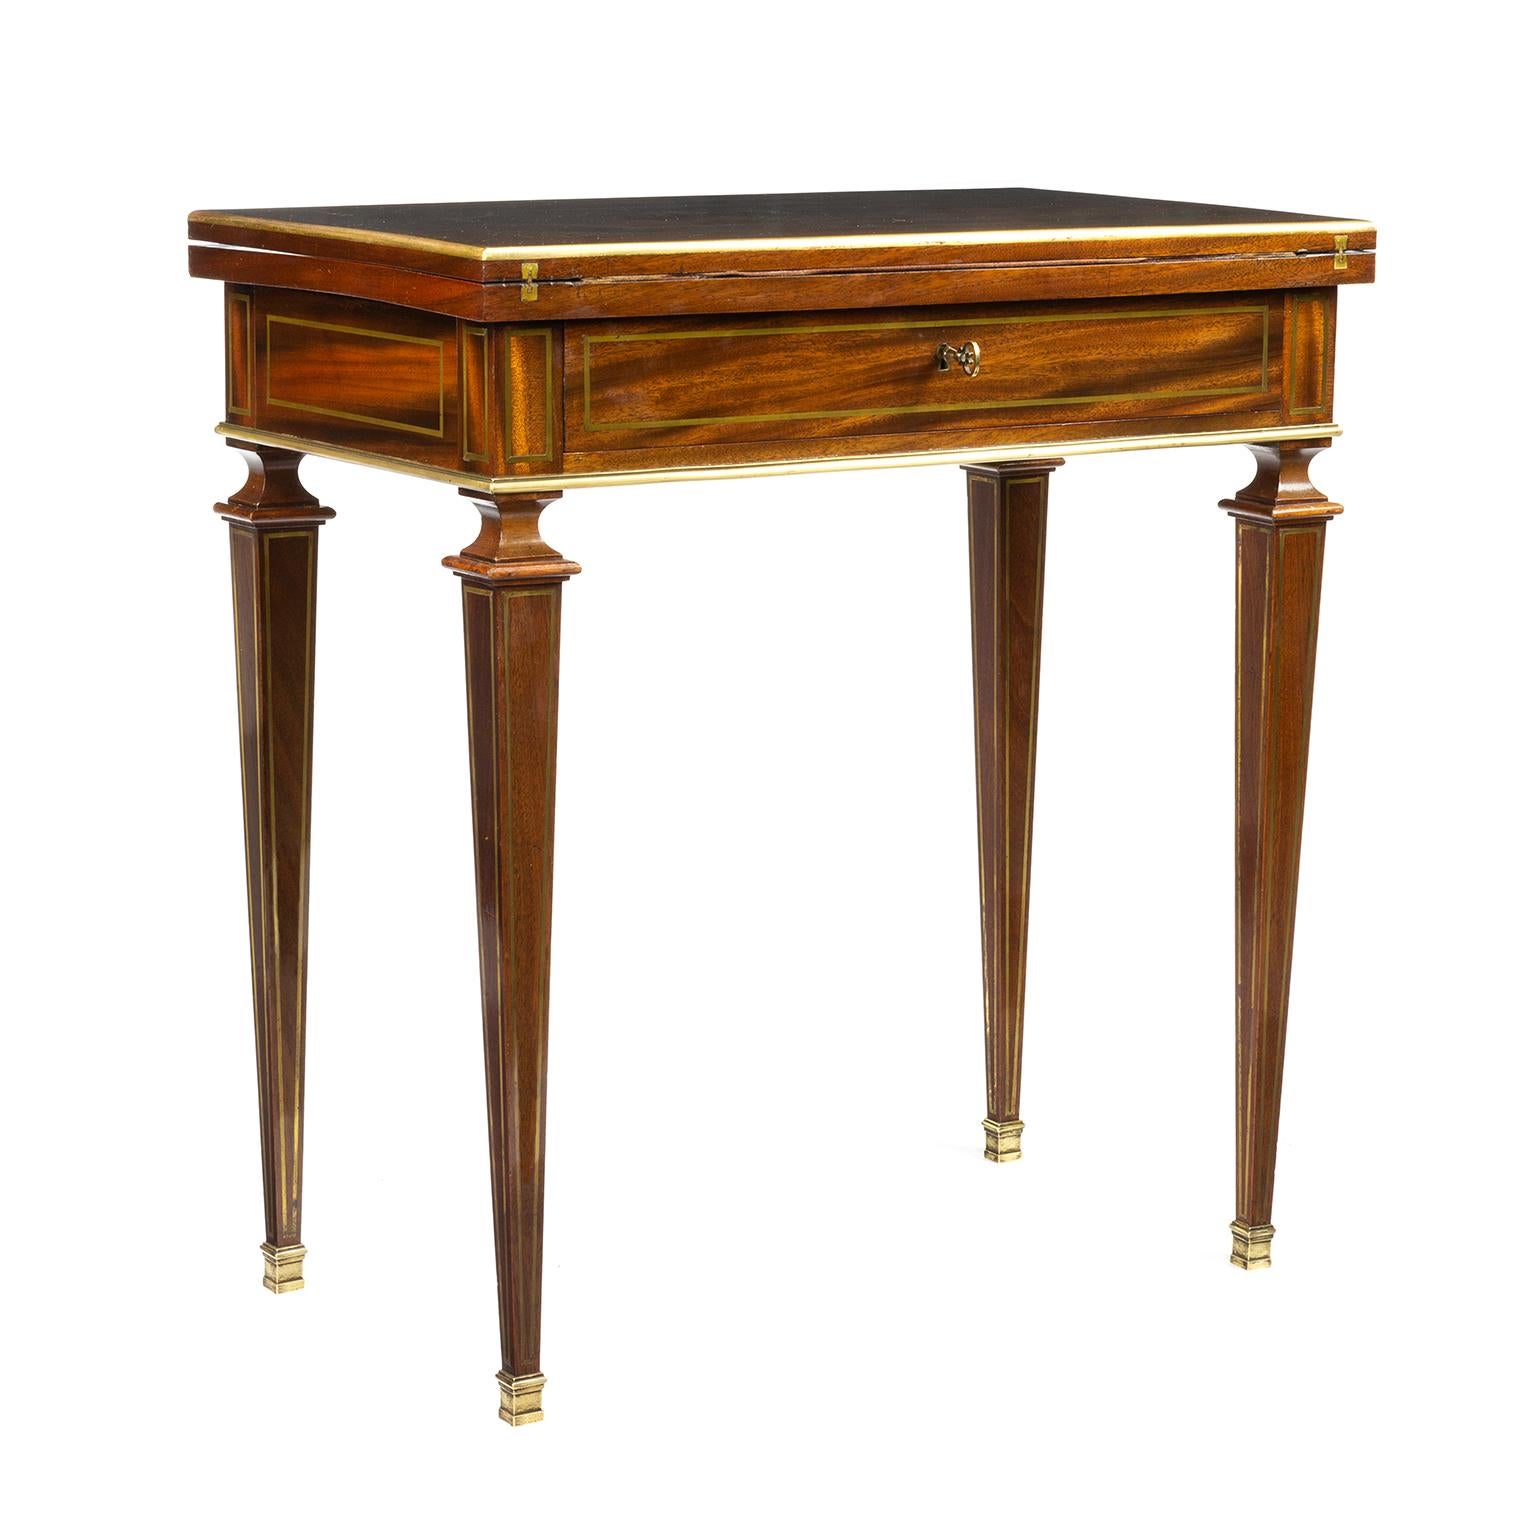 A French Empire combination writing, card table and dressing table. Mahogany with finely inlaid cut brass and a vacant cartouche within an ornate scroll frame, line inlaid borders. The purple felt interior within gilt tooled leather borders, the